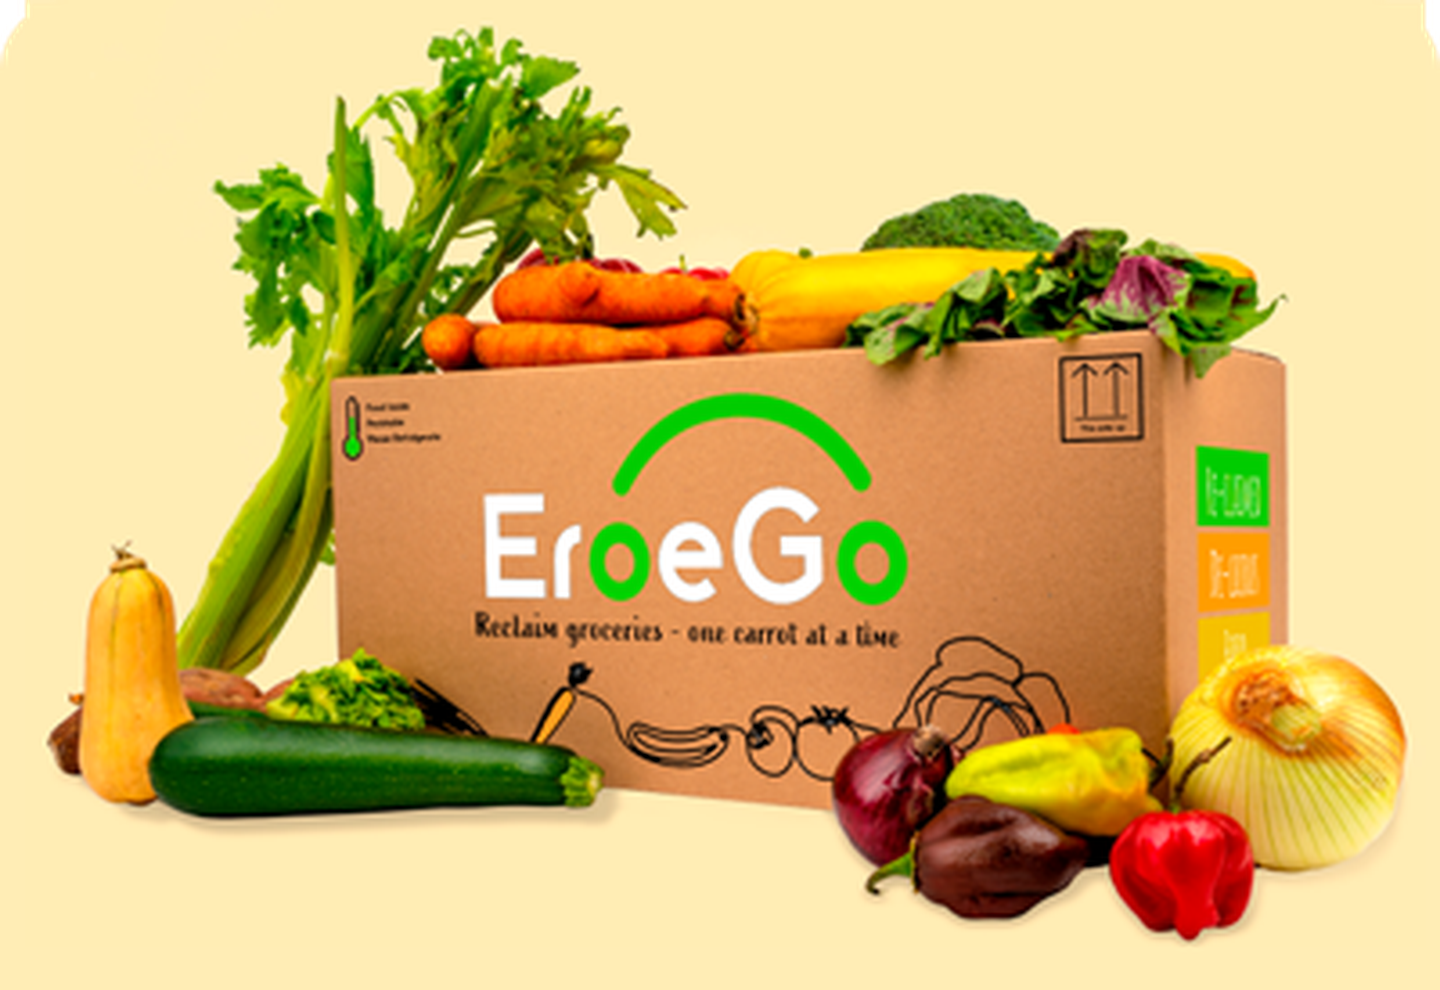 New UAE platform EroeGo delivers fruits and vegetables that may not be aesthetically pleasing – but are fresh – at discounted prices. Photo: EroeGo